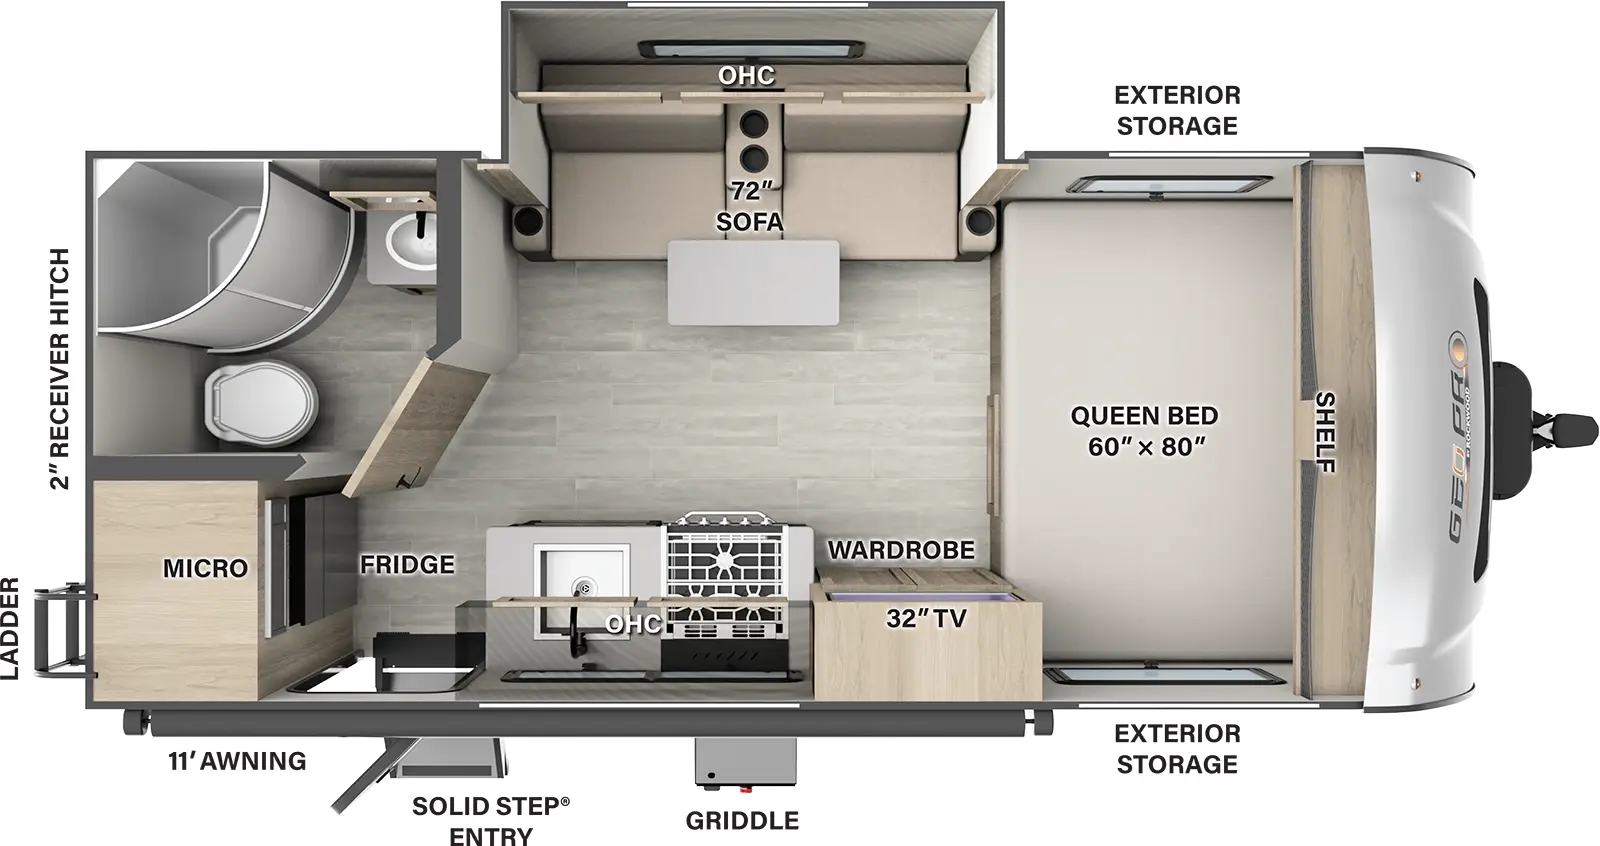 The G19FBS has one slide out and 1 entry. Exterior features storage, rear ladder, 2 inch receiver hitch, griddle, solid step entry, and 11 foot awning. Interior layout front to back: side-facing queen bed with shelf above; off-door side slide out with sofa, table, and overhead cabinet; door side wardrobe with TV, kitchen countertop with cooktop, sink, overhead cabinet, and entry;  rear door side refrigerator and microwave; rear off-door side full bathroom.